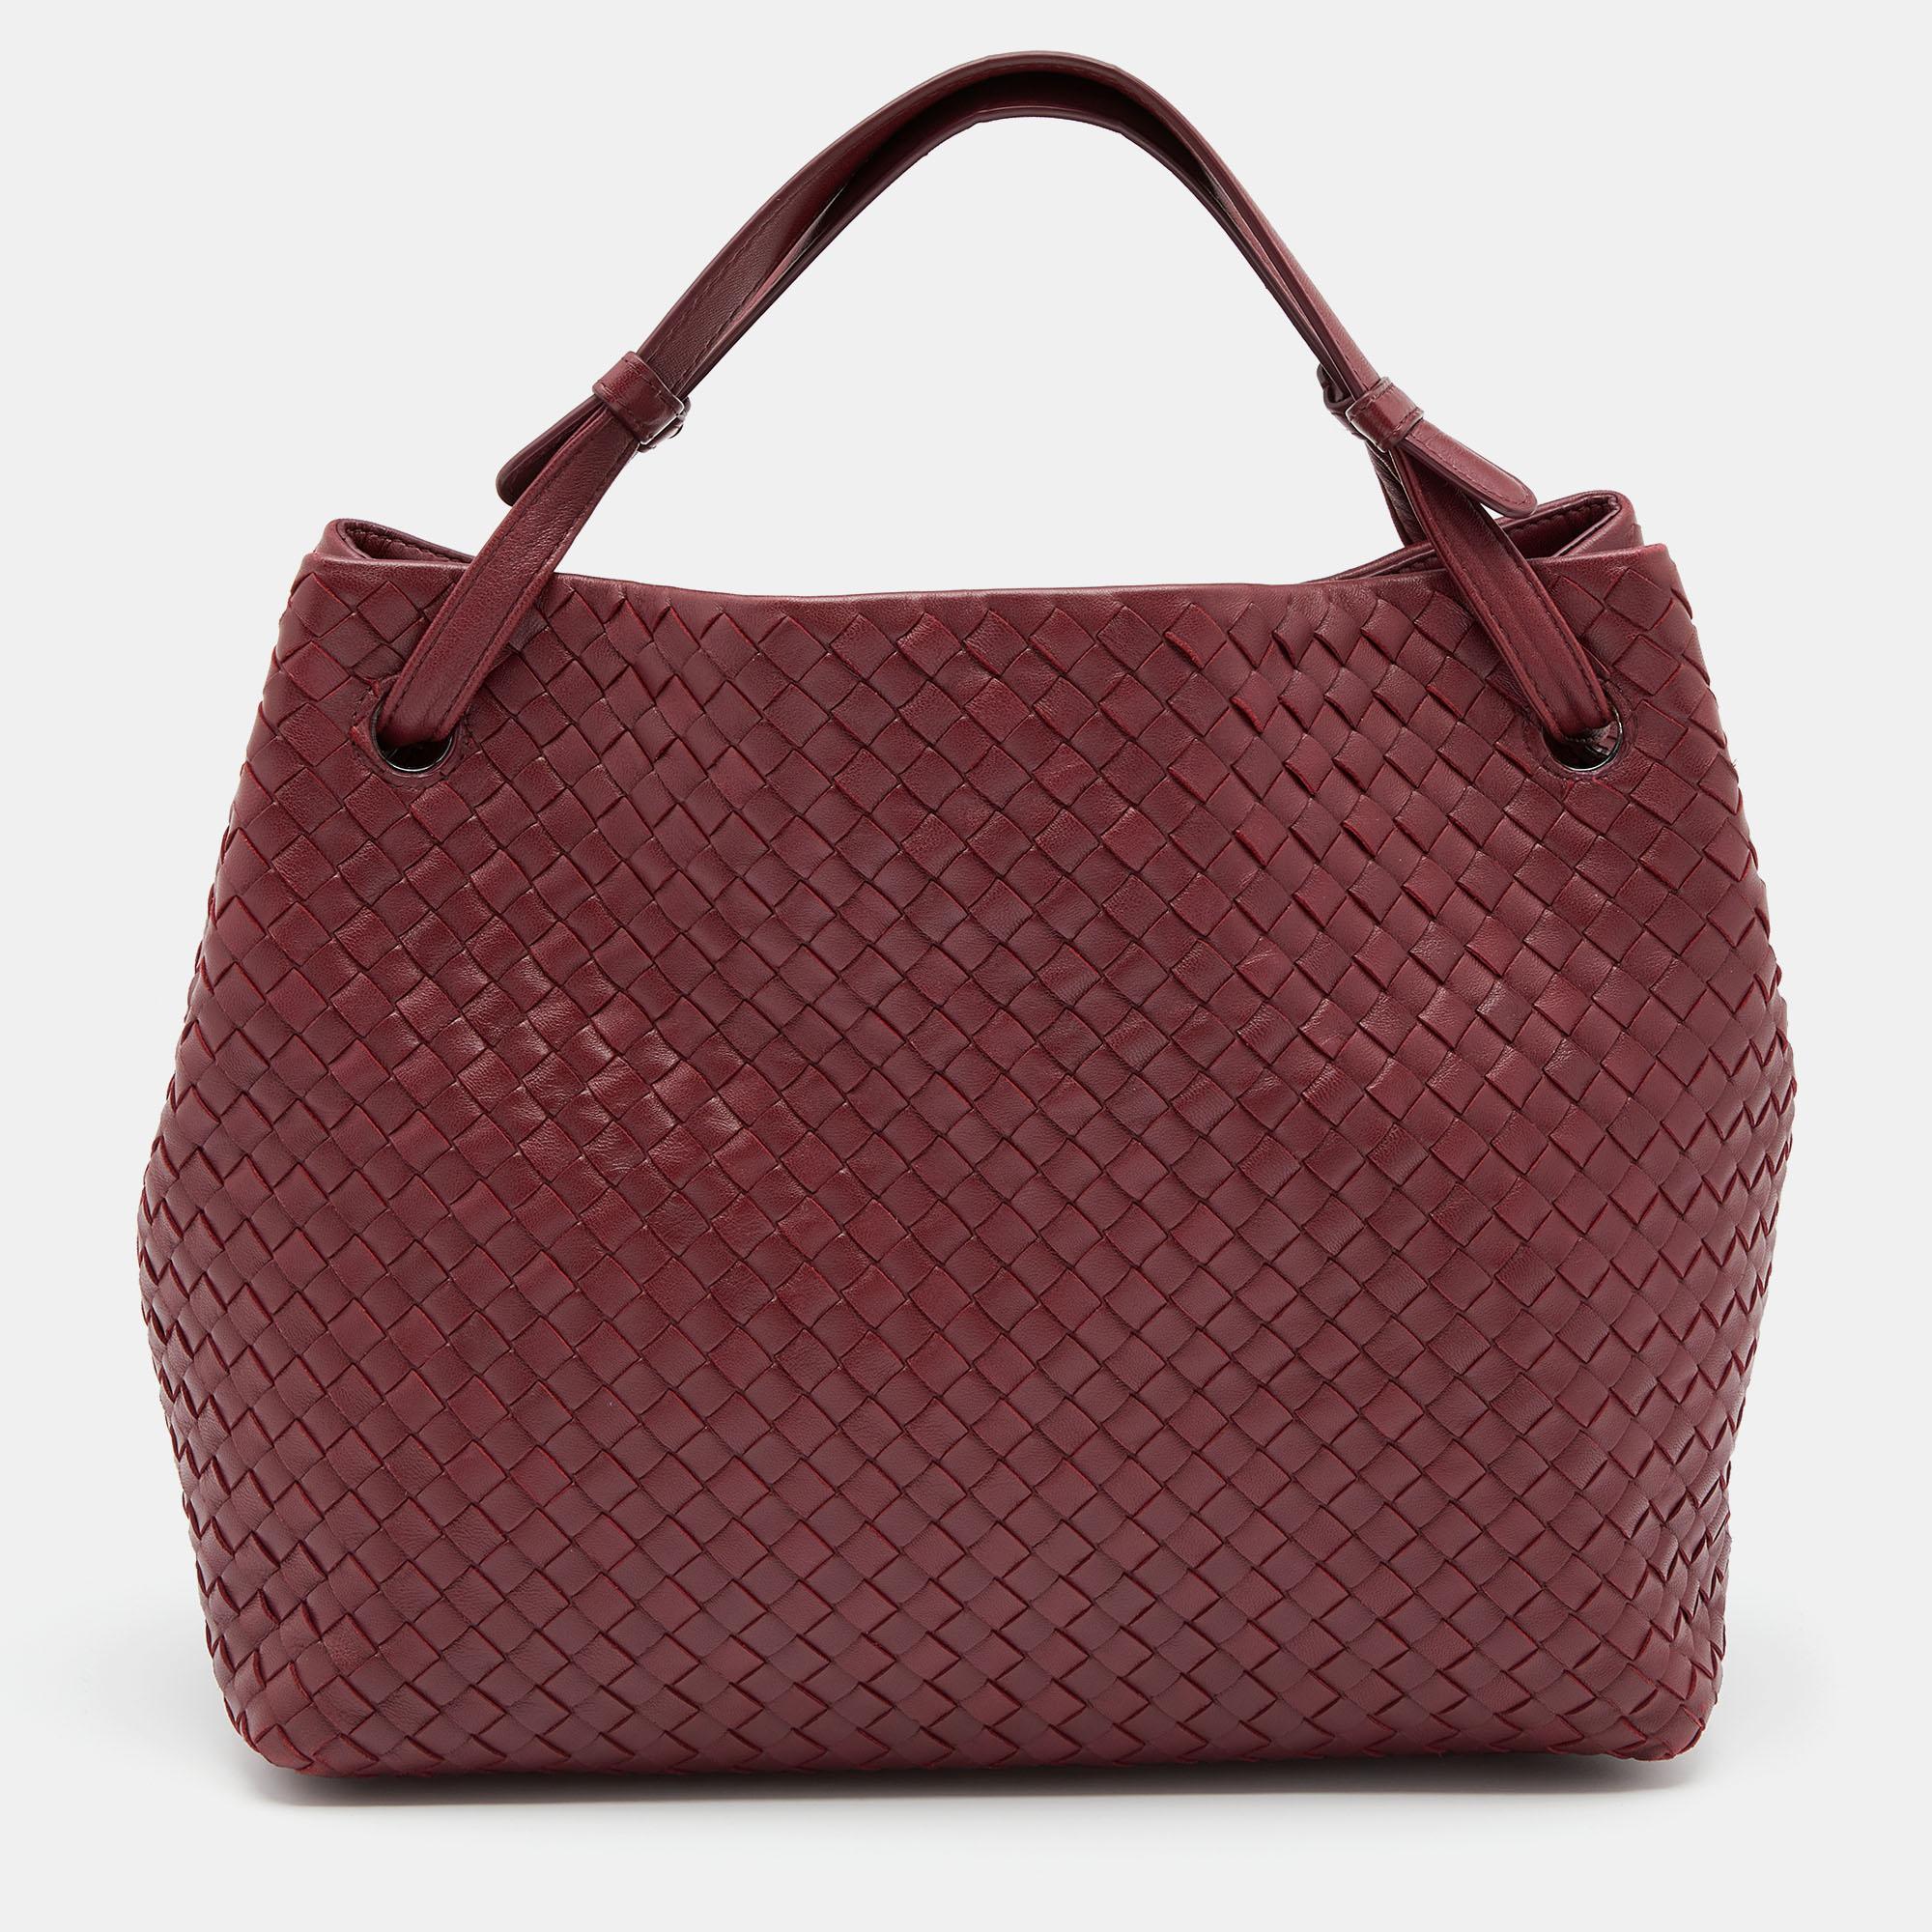 This Bottega Veneta bag presents the label's artistry in fine craftsmanship and classic designs. Sewn using Intrecciato leather, it features a burgundy shade, short handles, and a well-sized interior for your essentials.

Includes: Original Dustbag,